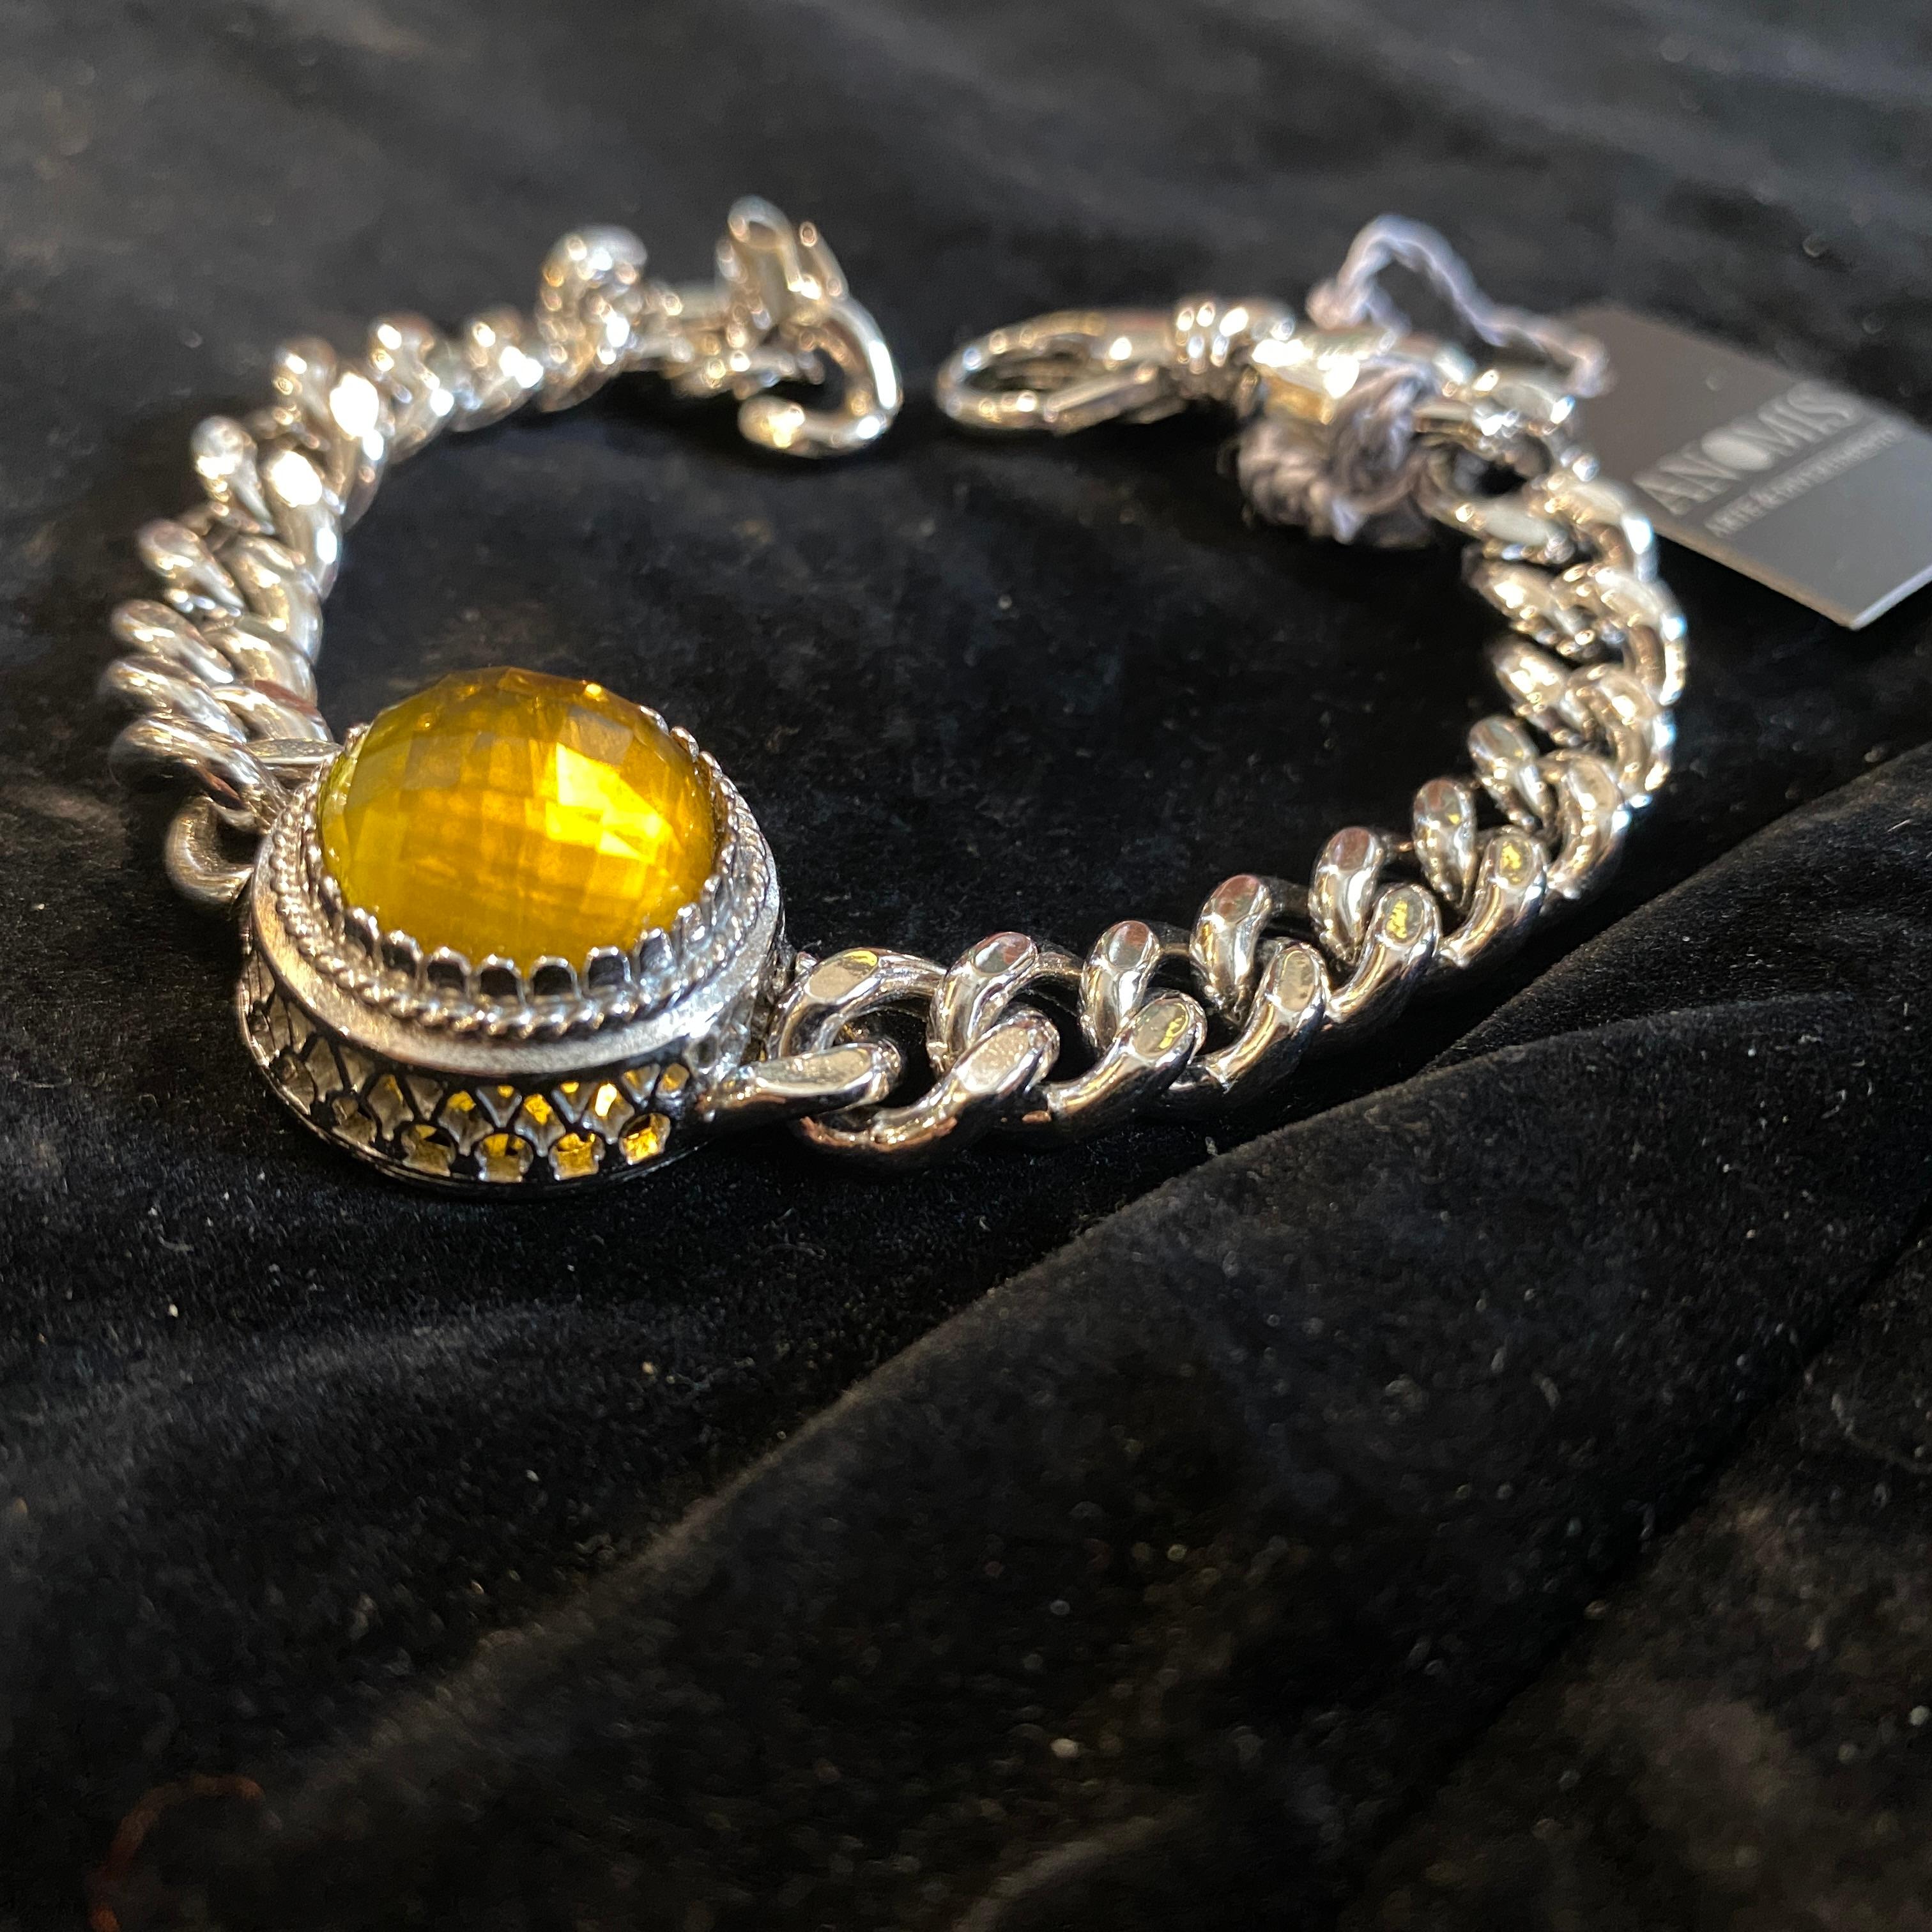 A never used high quality never worn sterling silver and round yellow hydrothermal quartz chain bracelet designed and manufactured in Italy by Anomis